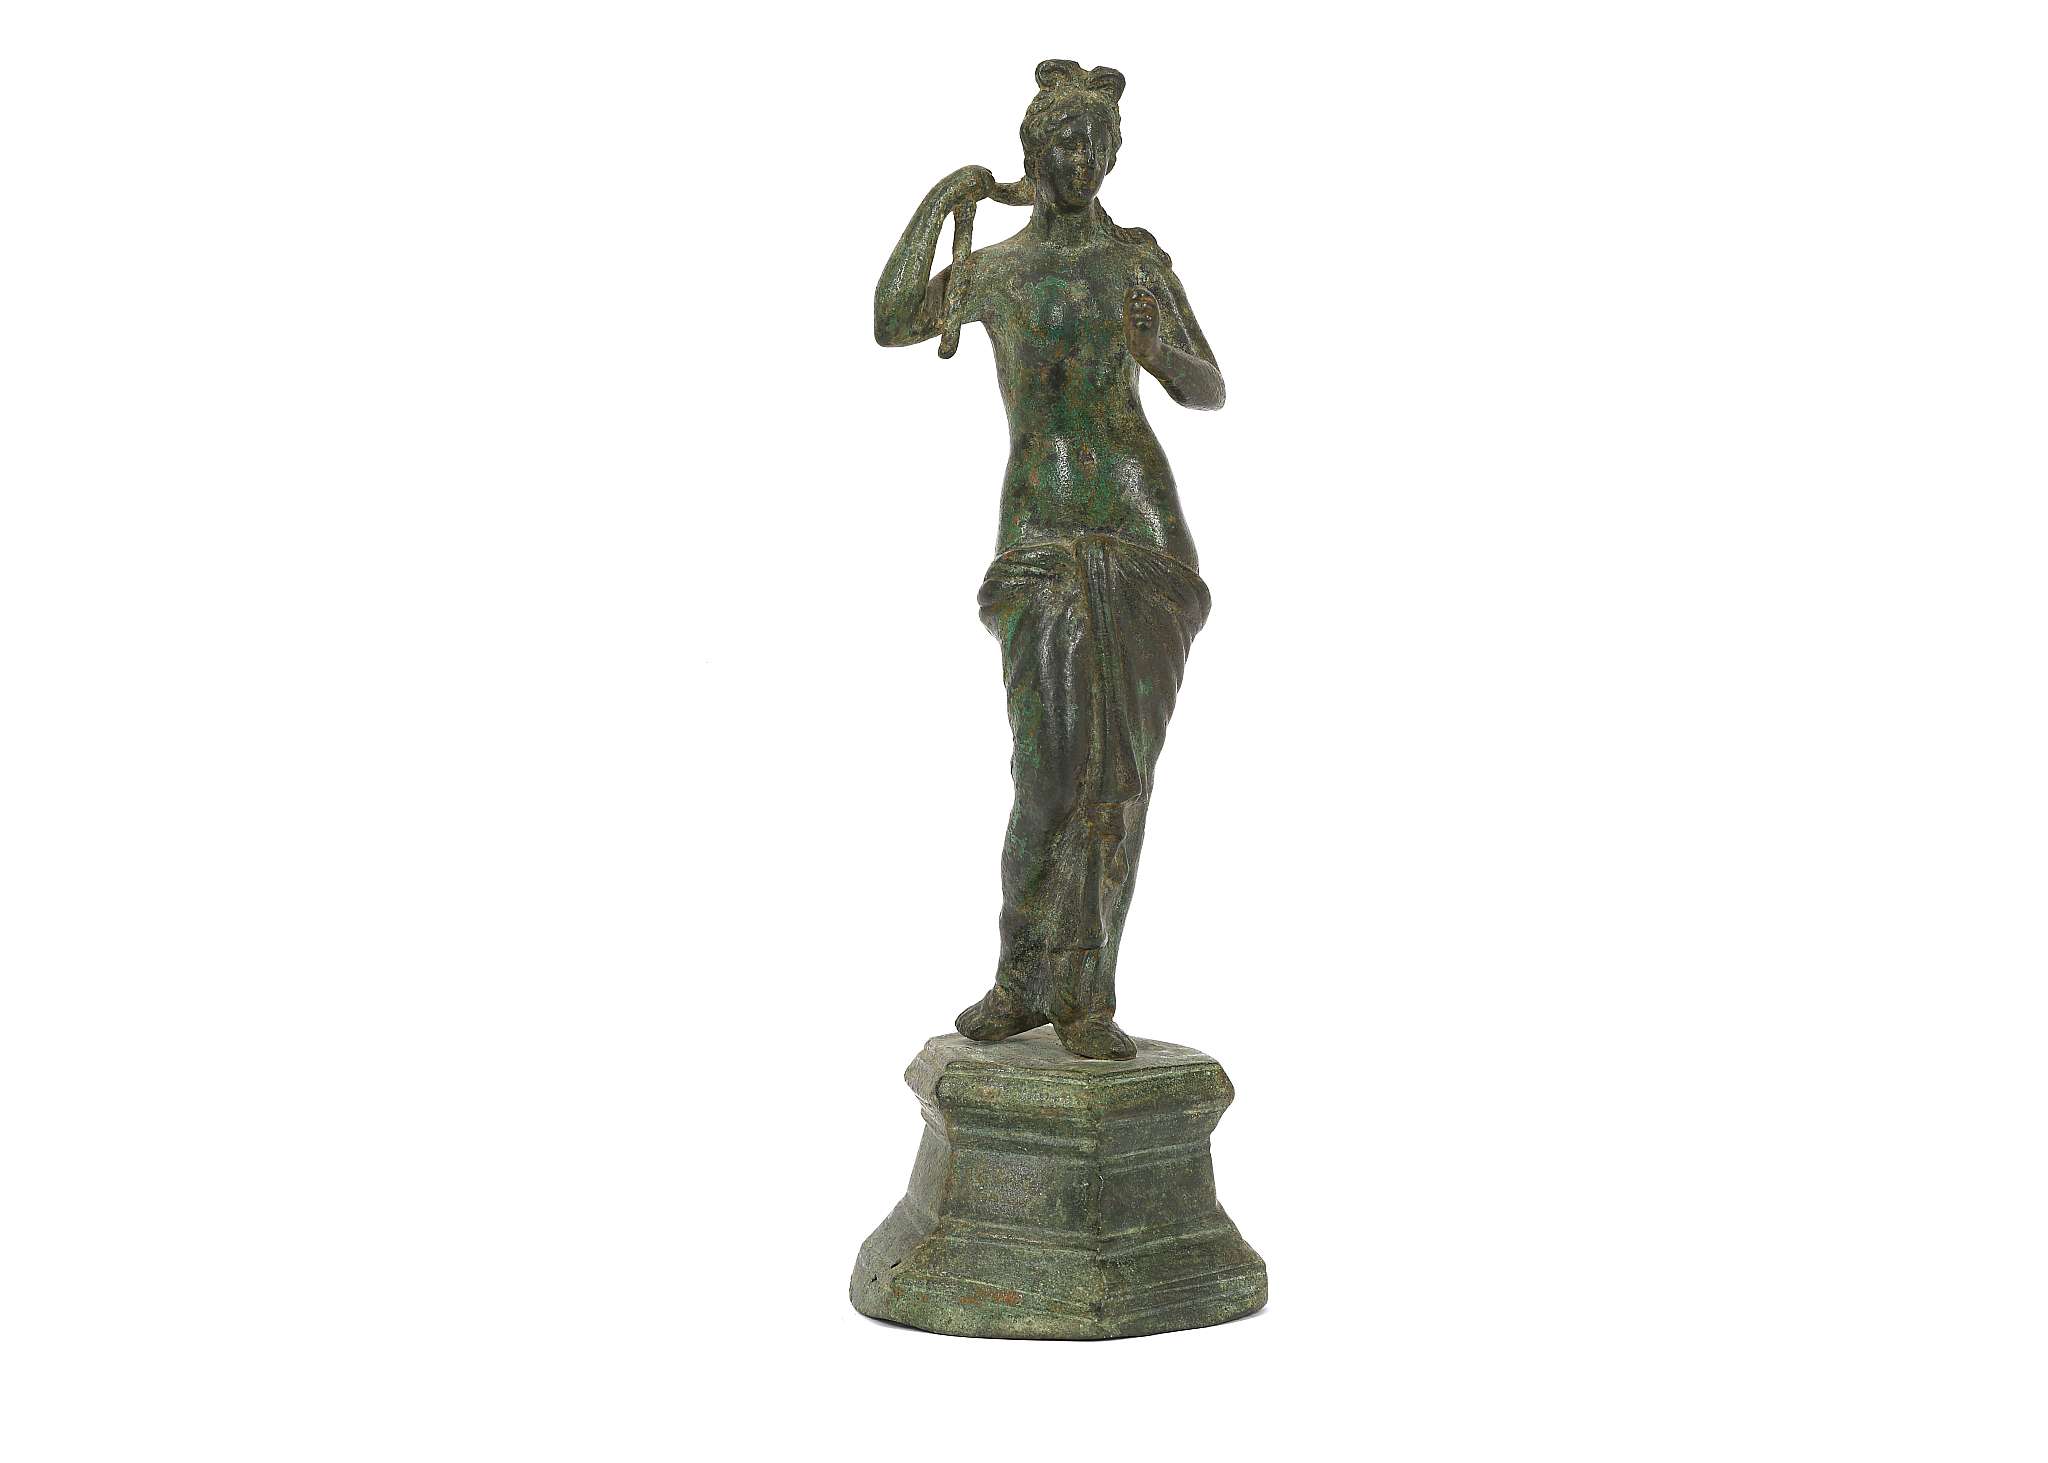 A ROMAN BRONZE APHRODITE Circa 1st - 2nd century A.D. "..there is nothing among the blessed gods